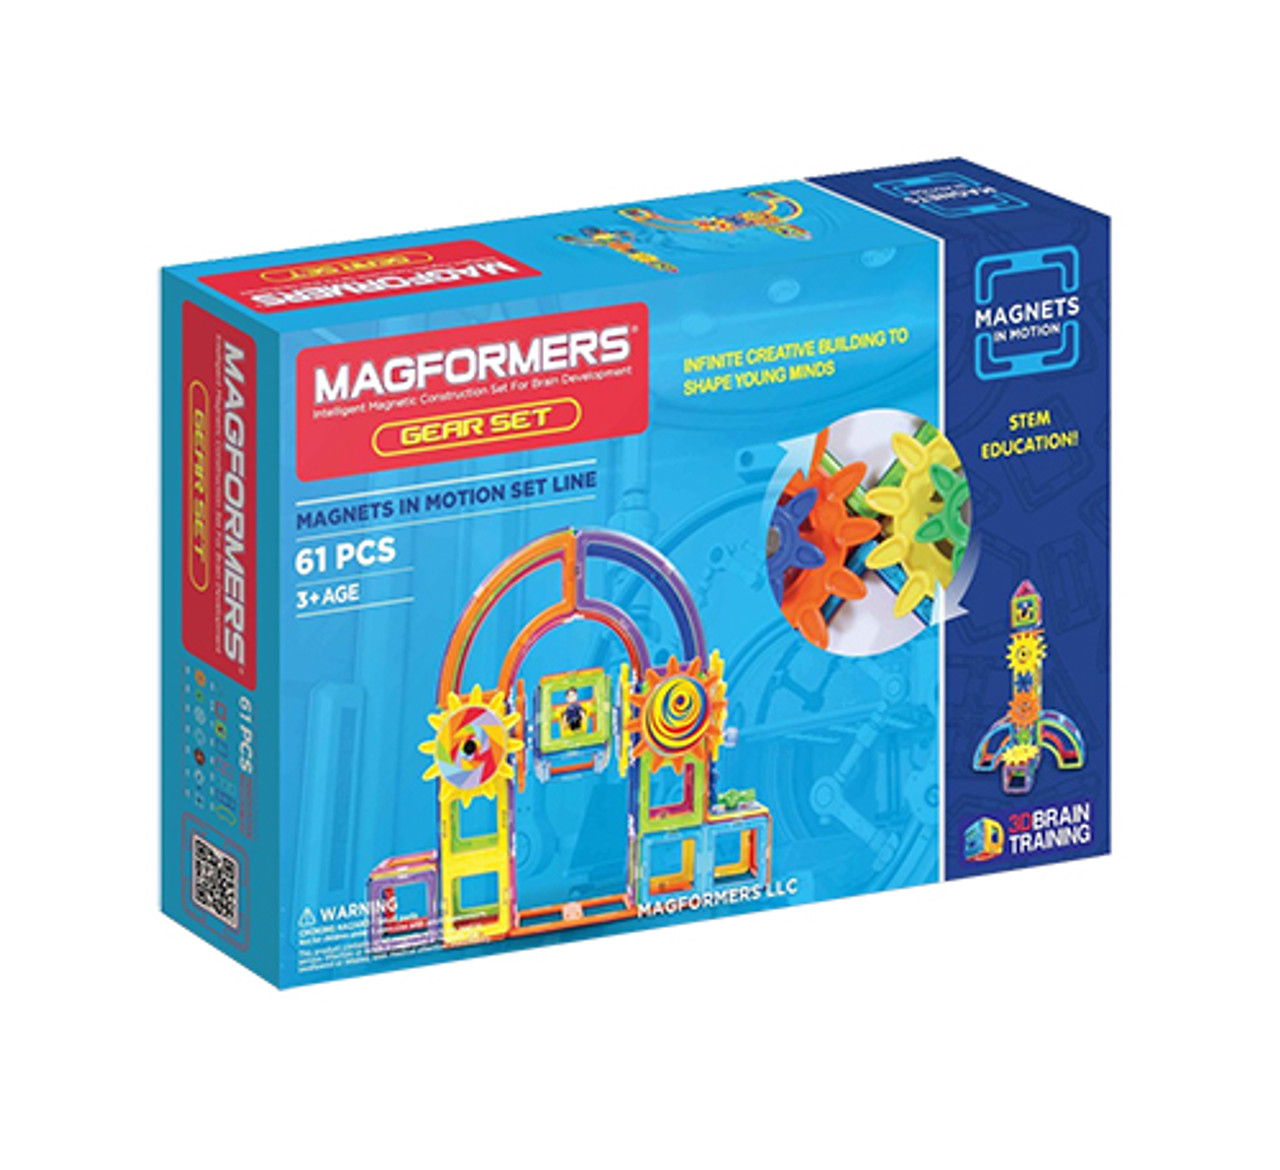 Magformers Magnets in Motion Magnetic Construction Set, 61-Piece - Midwest  Technology Products